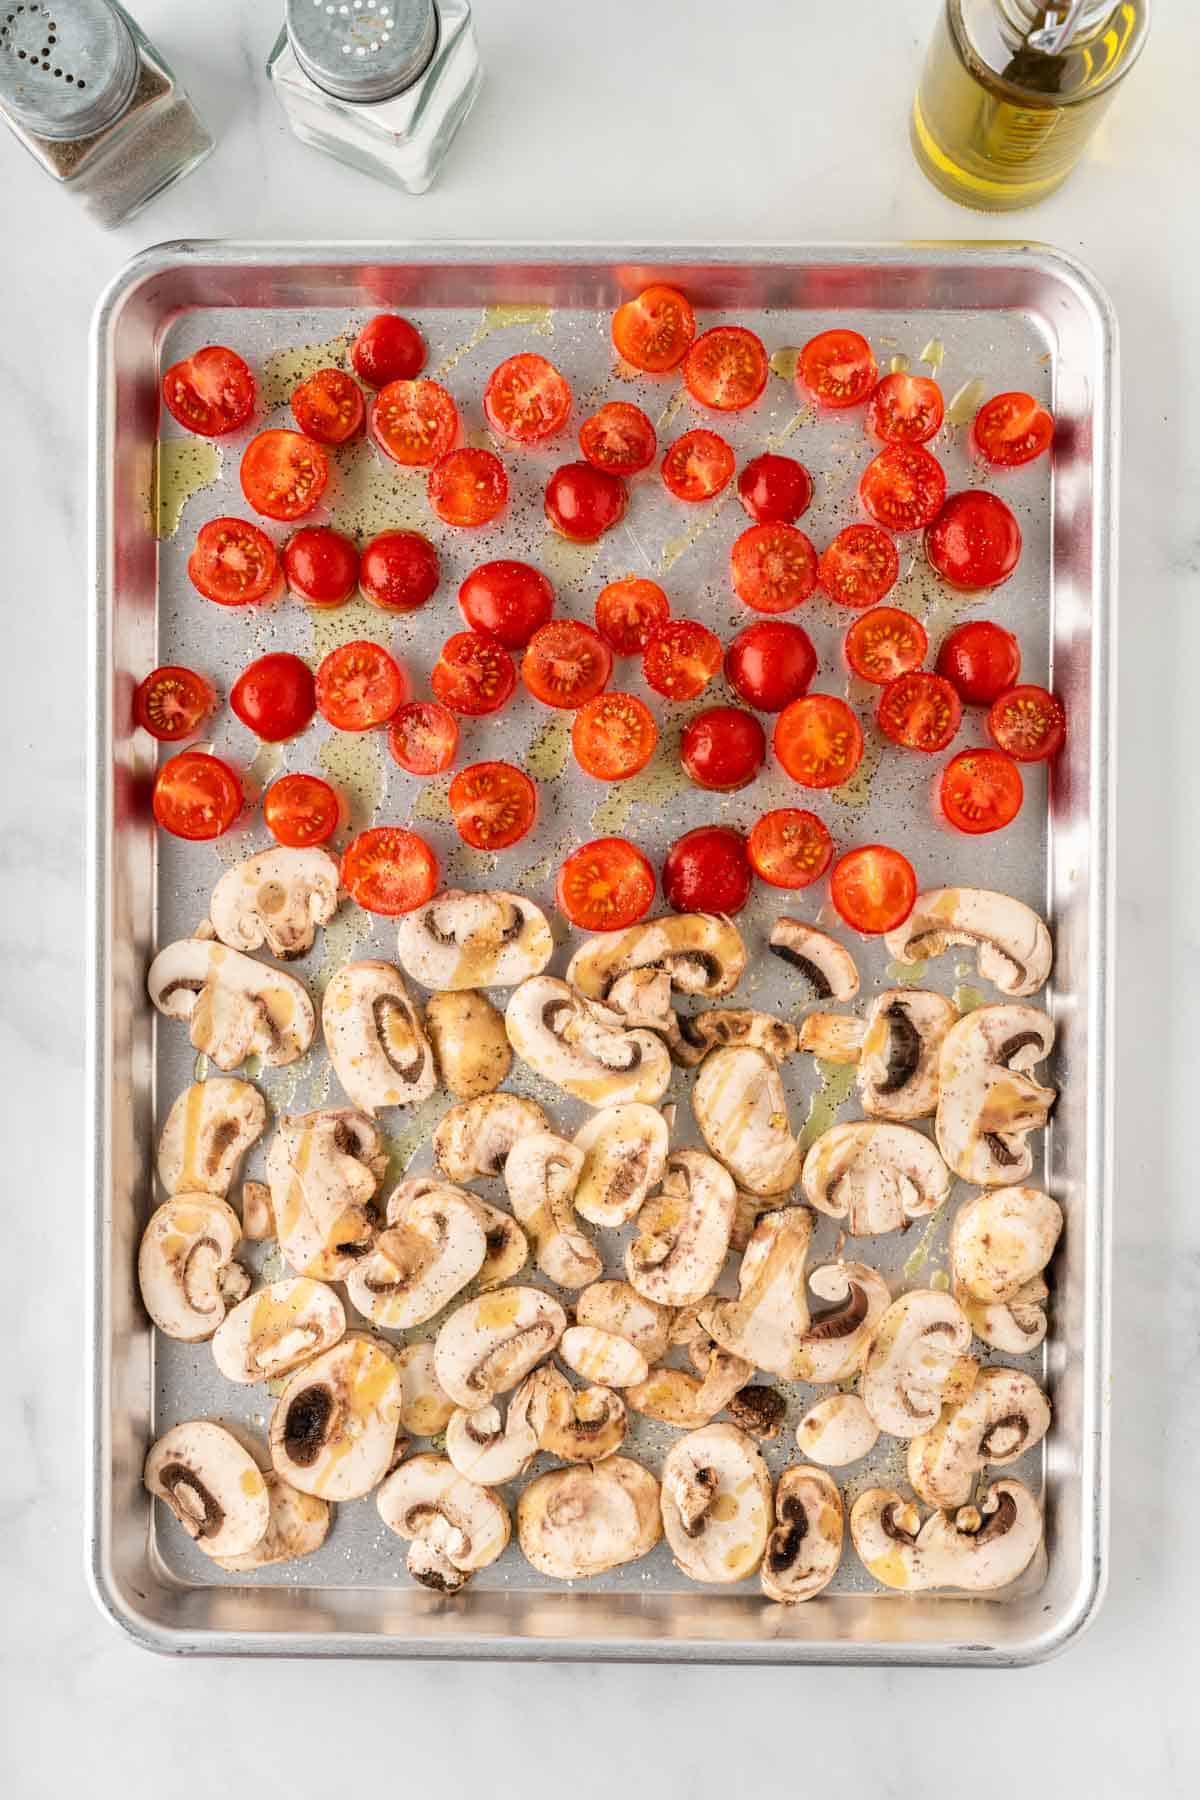 sliced mushrooms and cherry tomatoes on a baking sheet